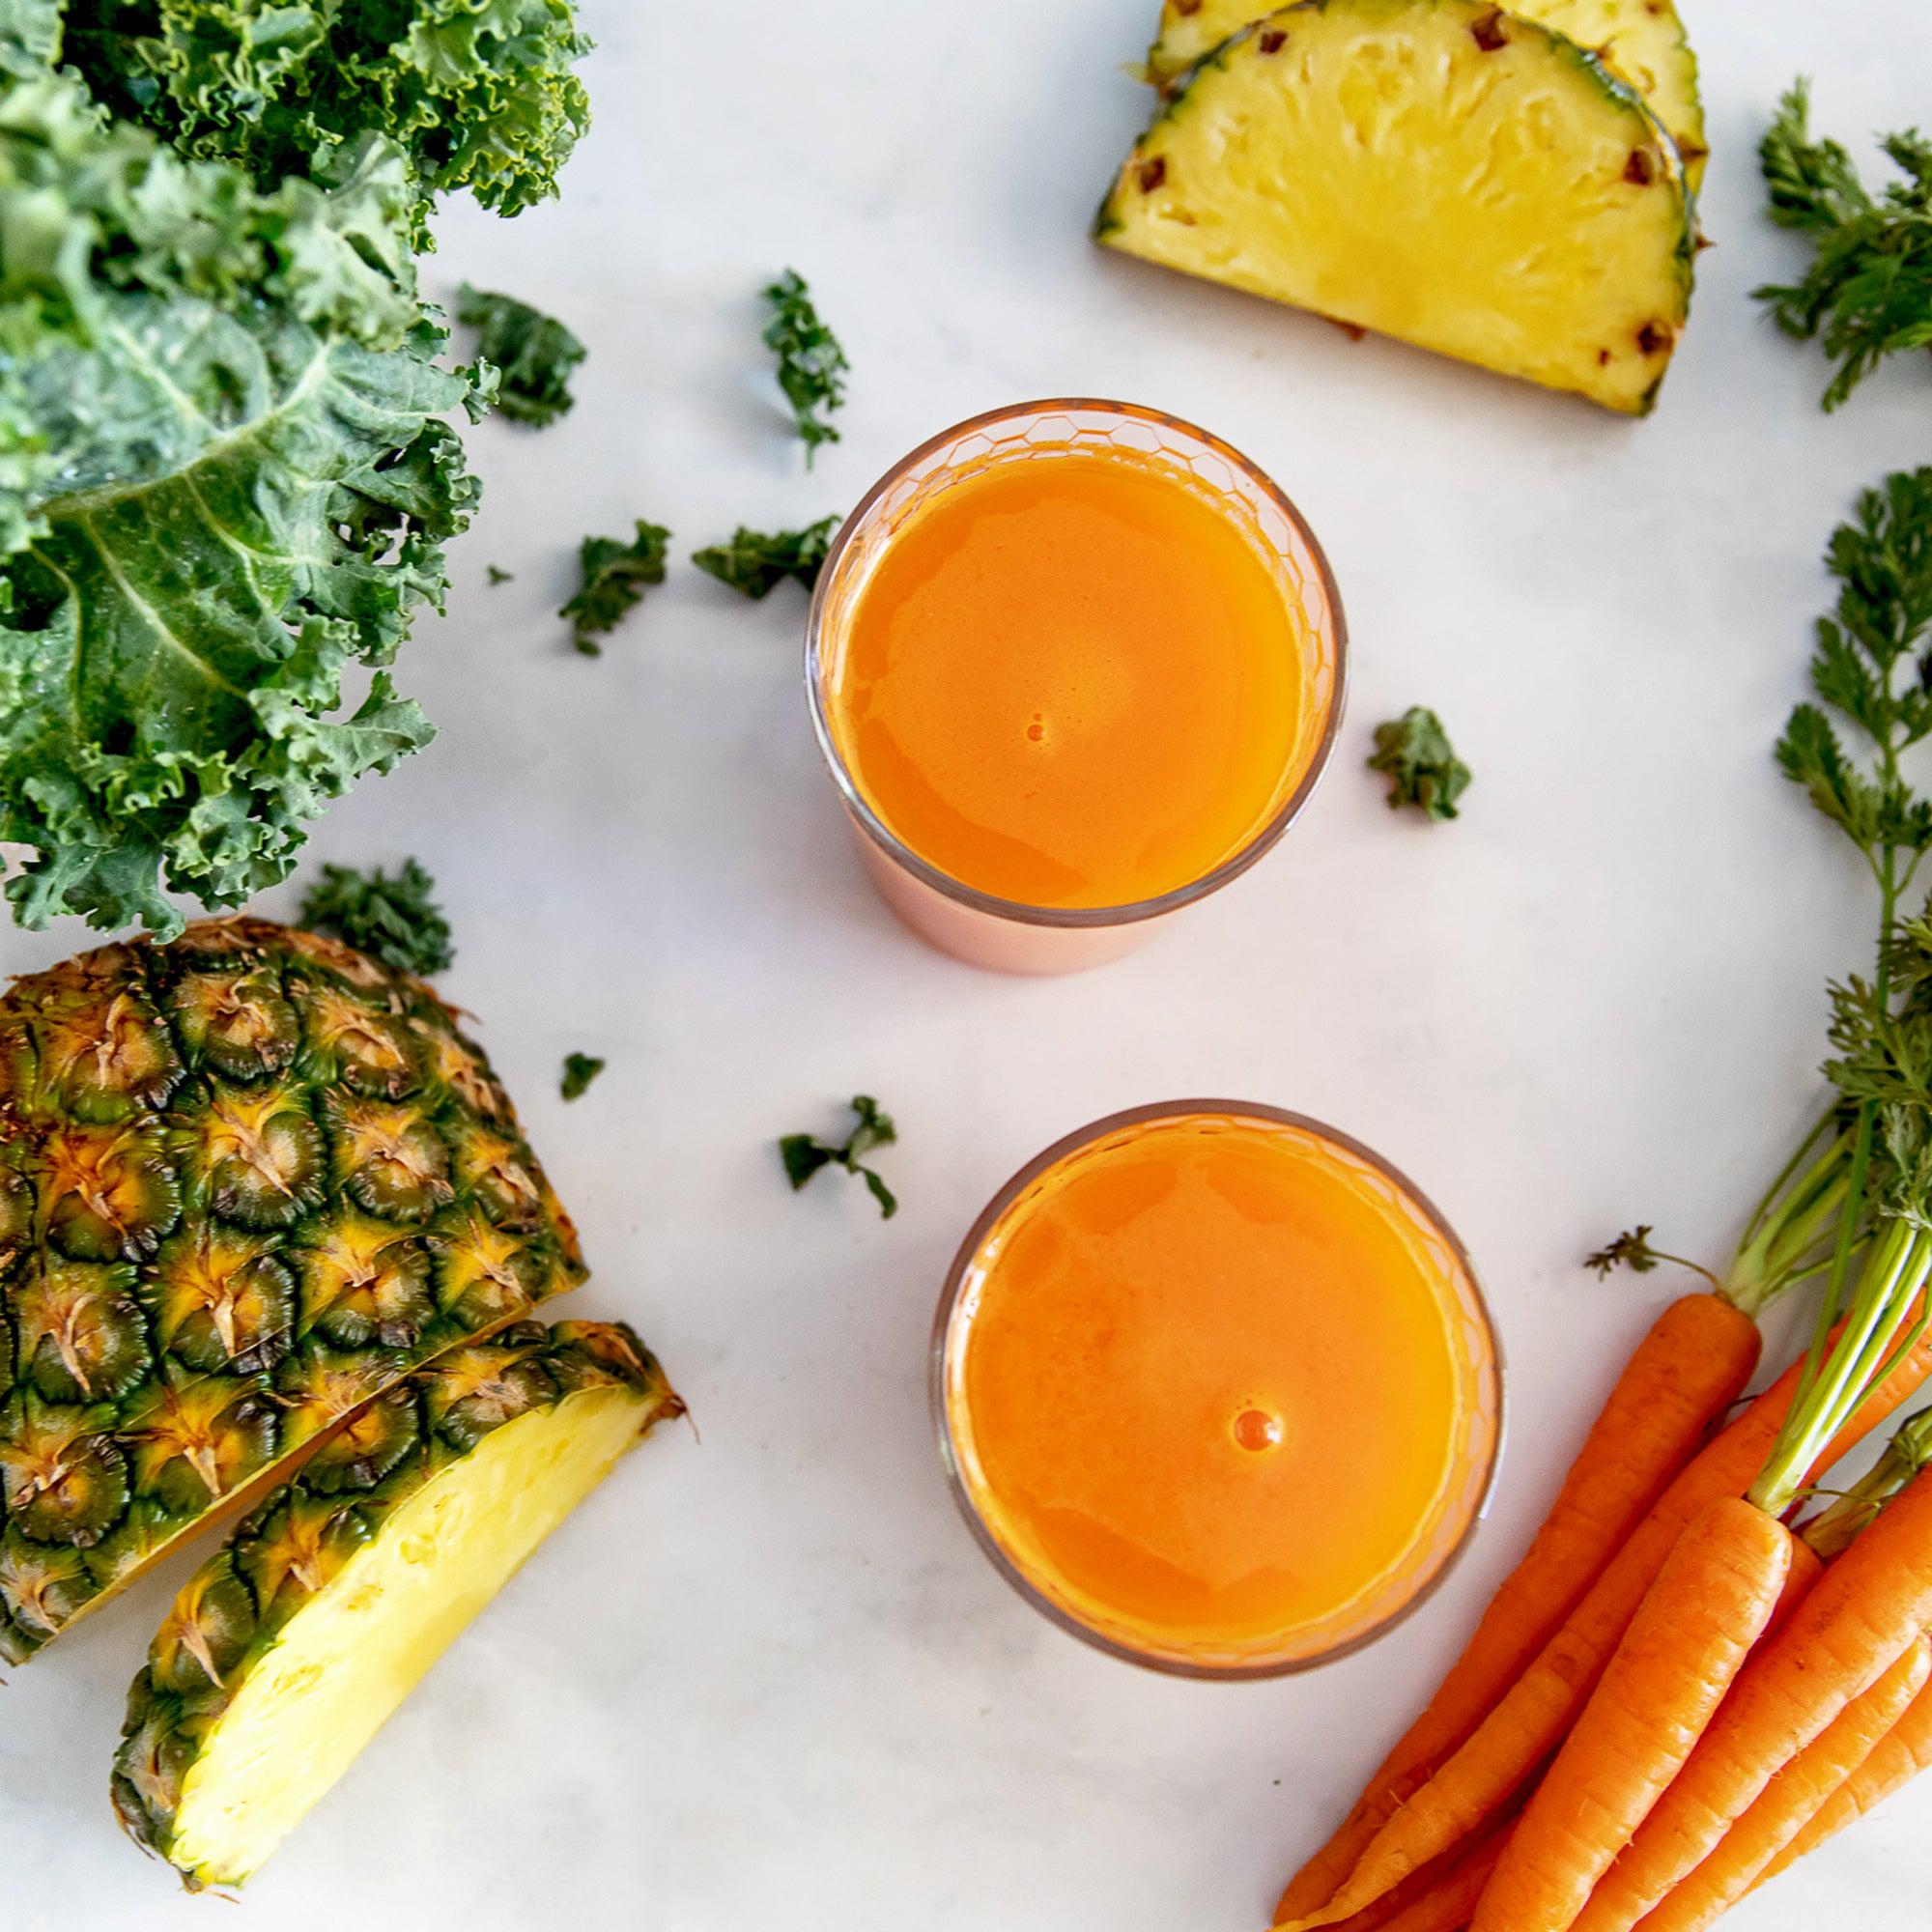 Two glasses of carrot juice surrounded by carrots, pineapple slices, and kale.